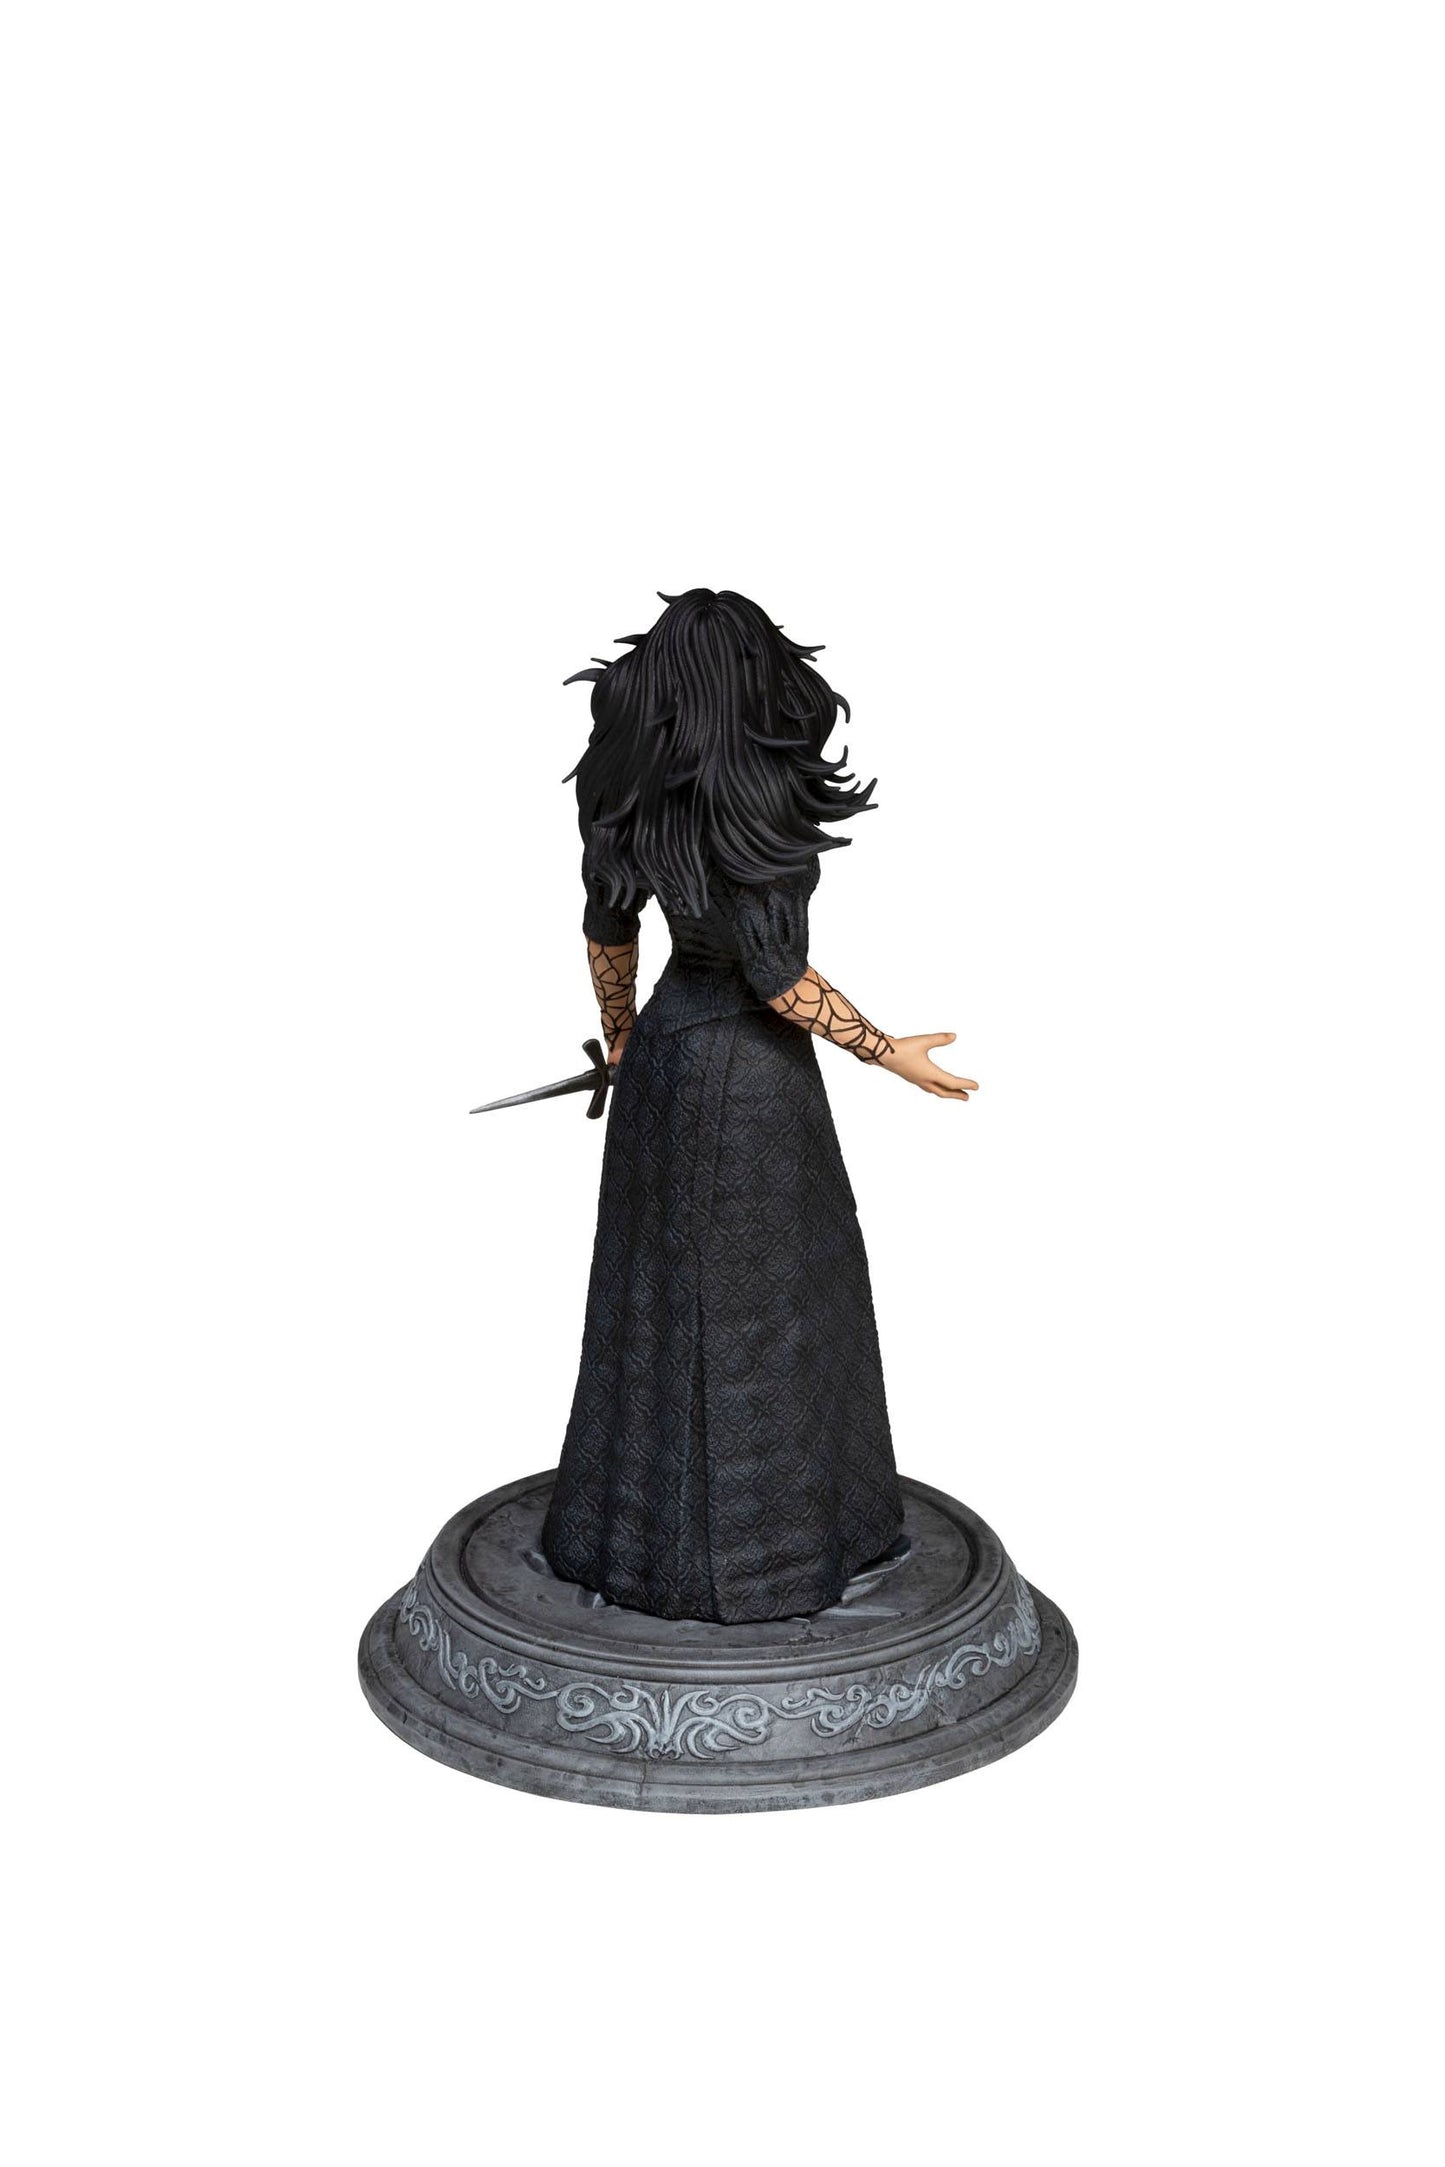 THE WITCHER - Yennefer Figure 20 cm